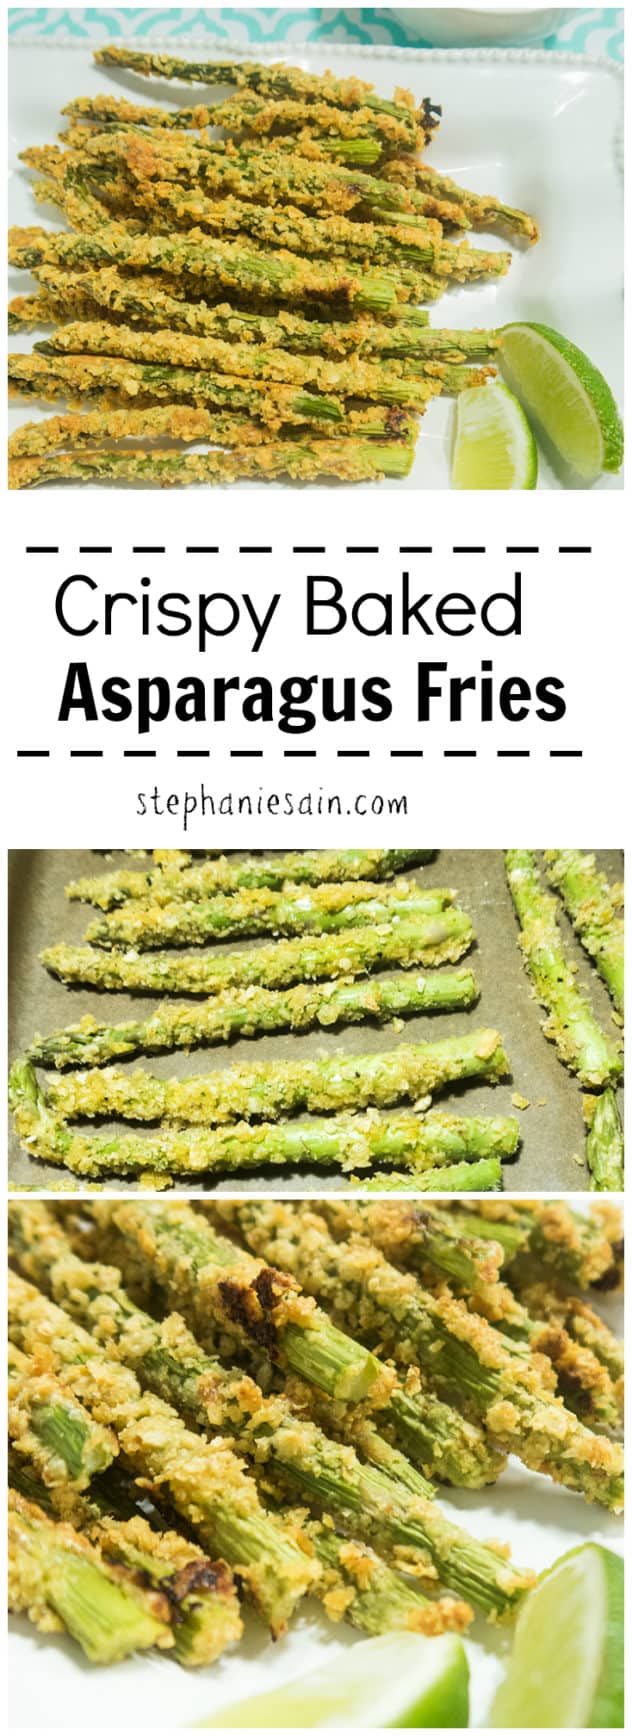 Crispy Baked Asparagus Fries are a tasty healthier version for fries. They are the perfect side with almost anything or could even be served as an appetizer. Vegetarian & Gluten Free.